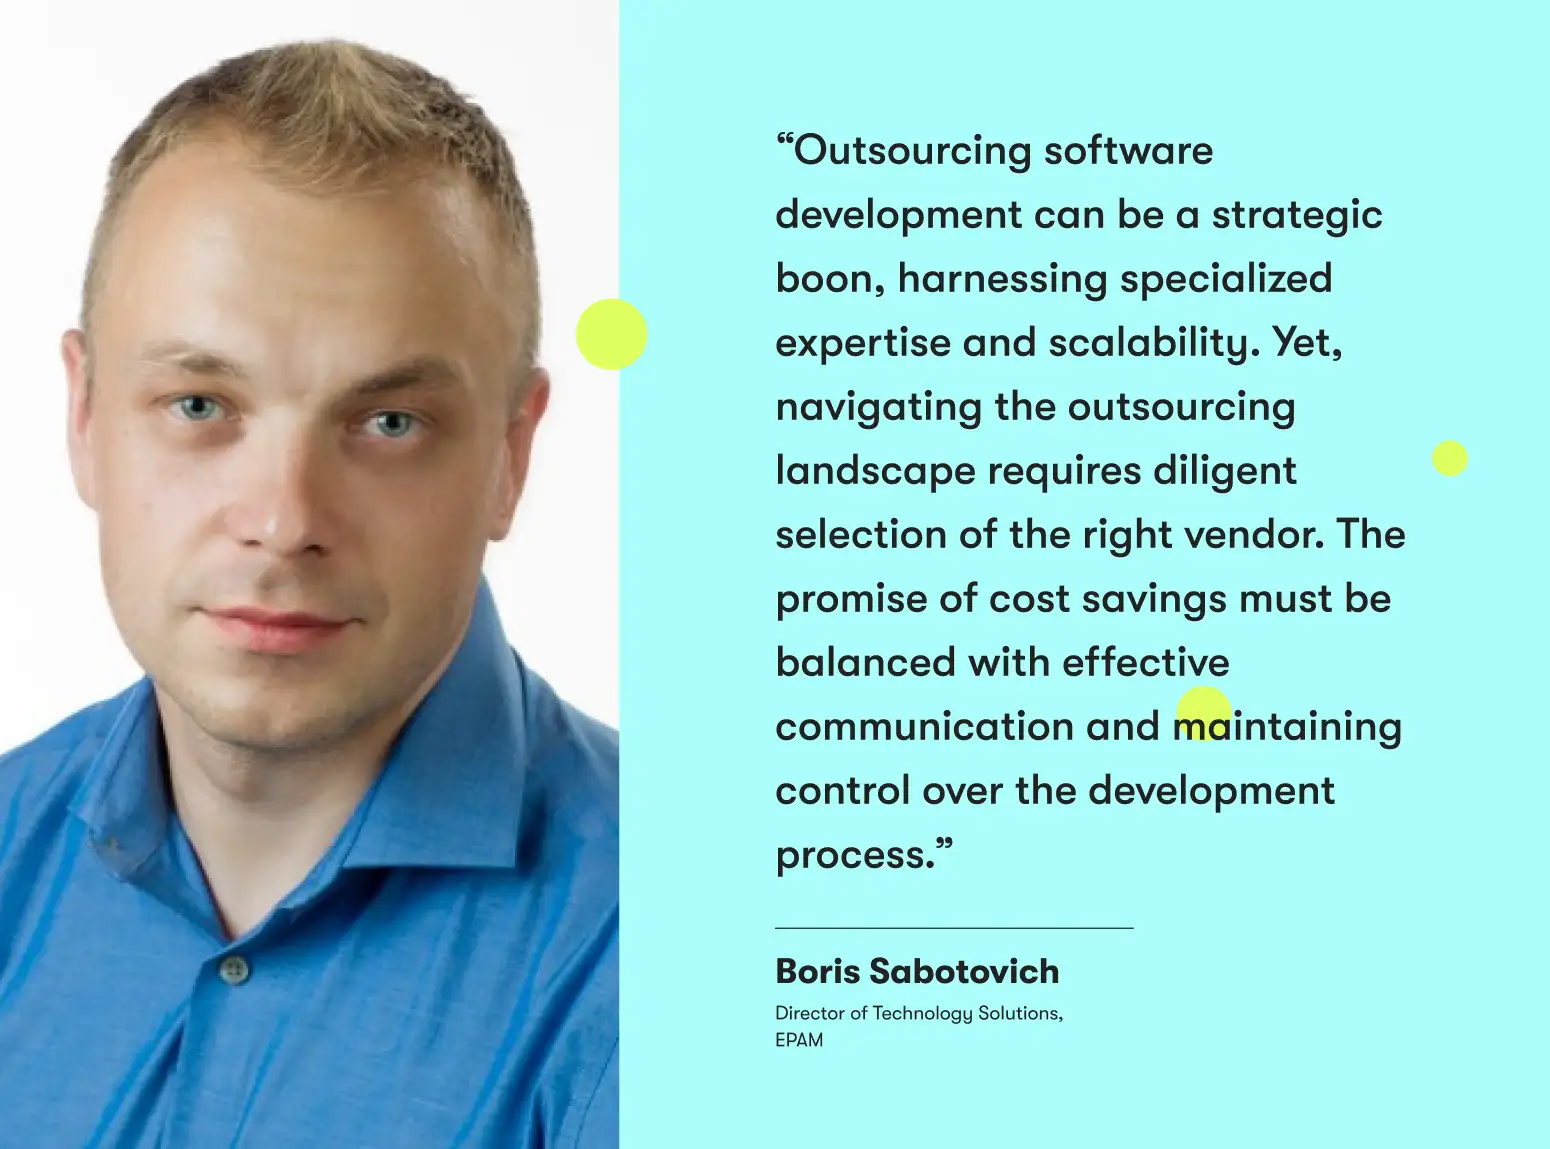 Boris Sabotovich, Director of Technology Solutions, EPAM on choosing the right external vendor